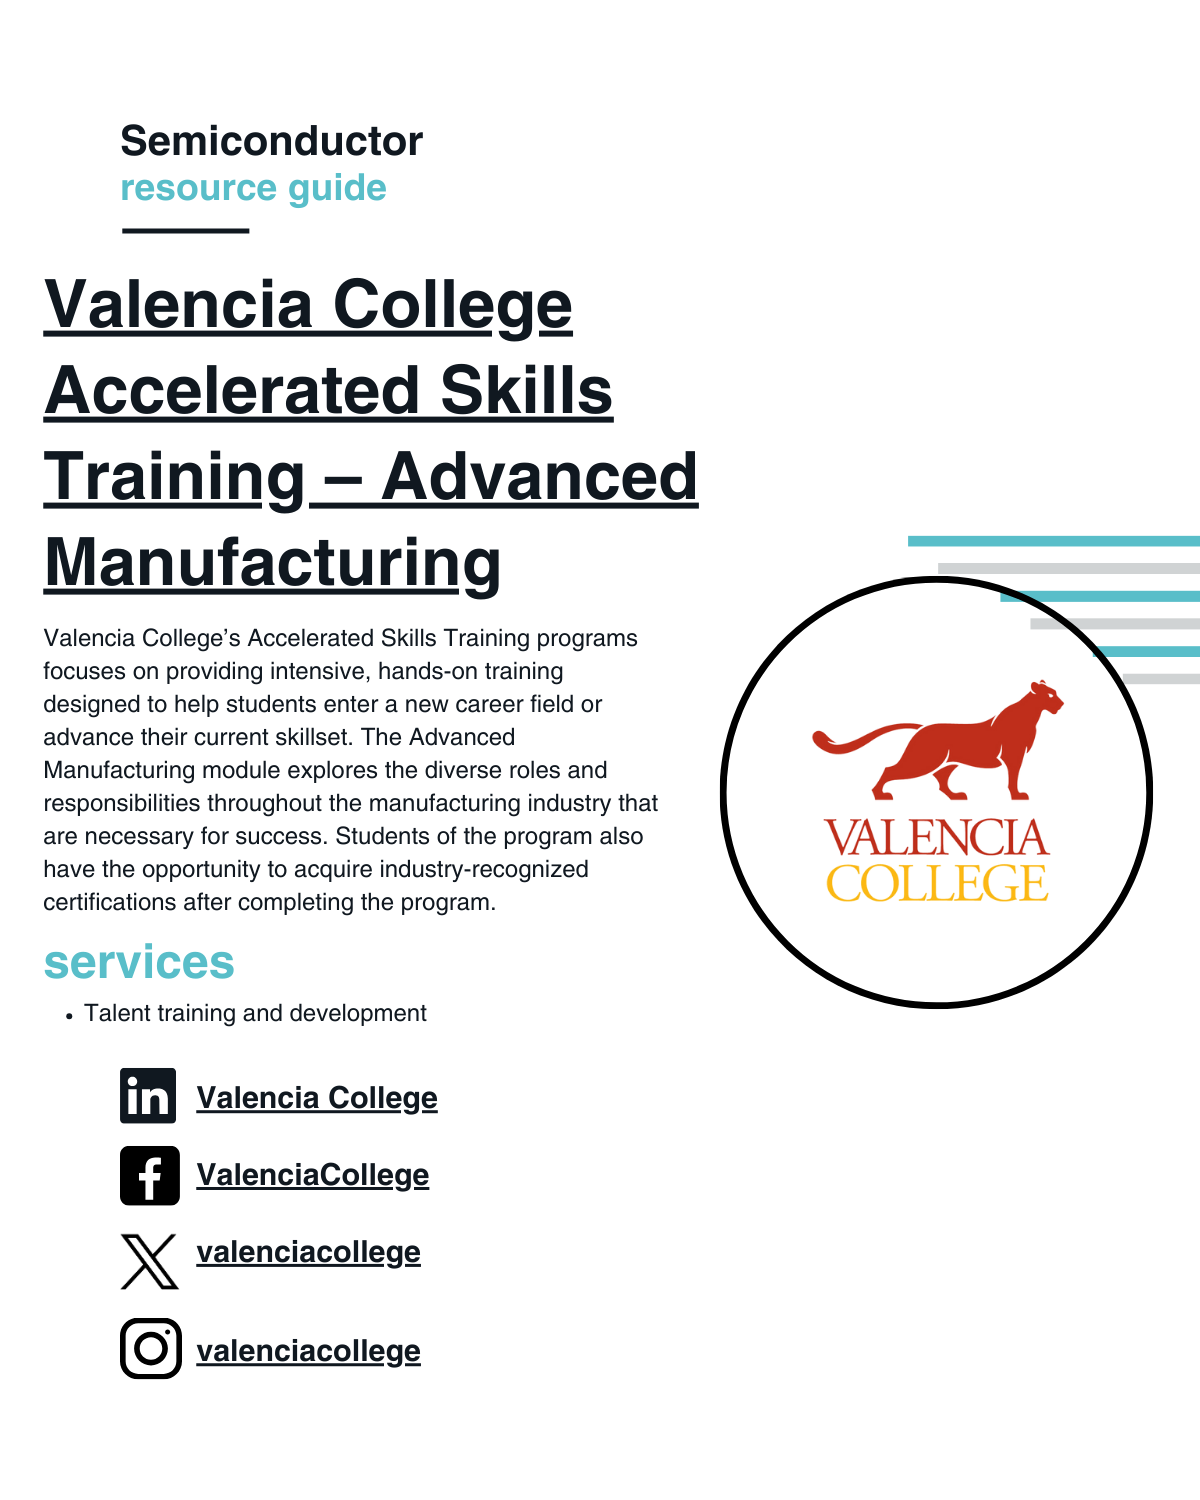 Valencia College’s Accelerated Skills Training programs focuses on providing intensive, hands-on training designed to help students enter a new career field or advance their current skillset. The Advanced Manufacturing module explores the diverse roles and responsibilities throughout the manufacturing industry that are necessary for success. Students of the program also have the opportunity to acquire industry-recognized certifications after completing the program.